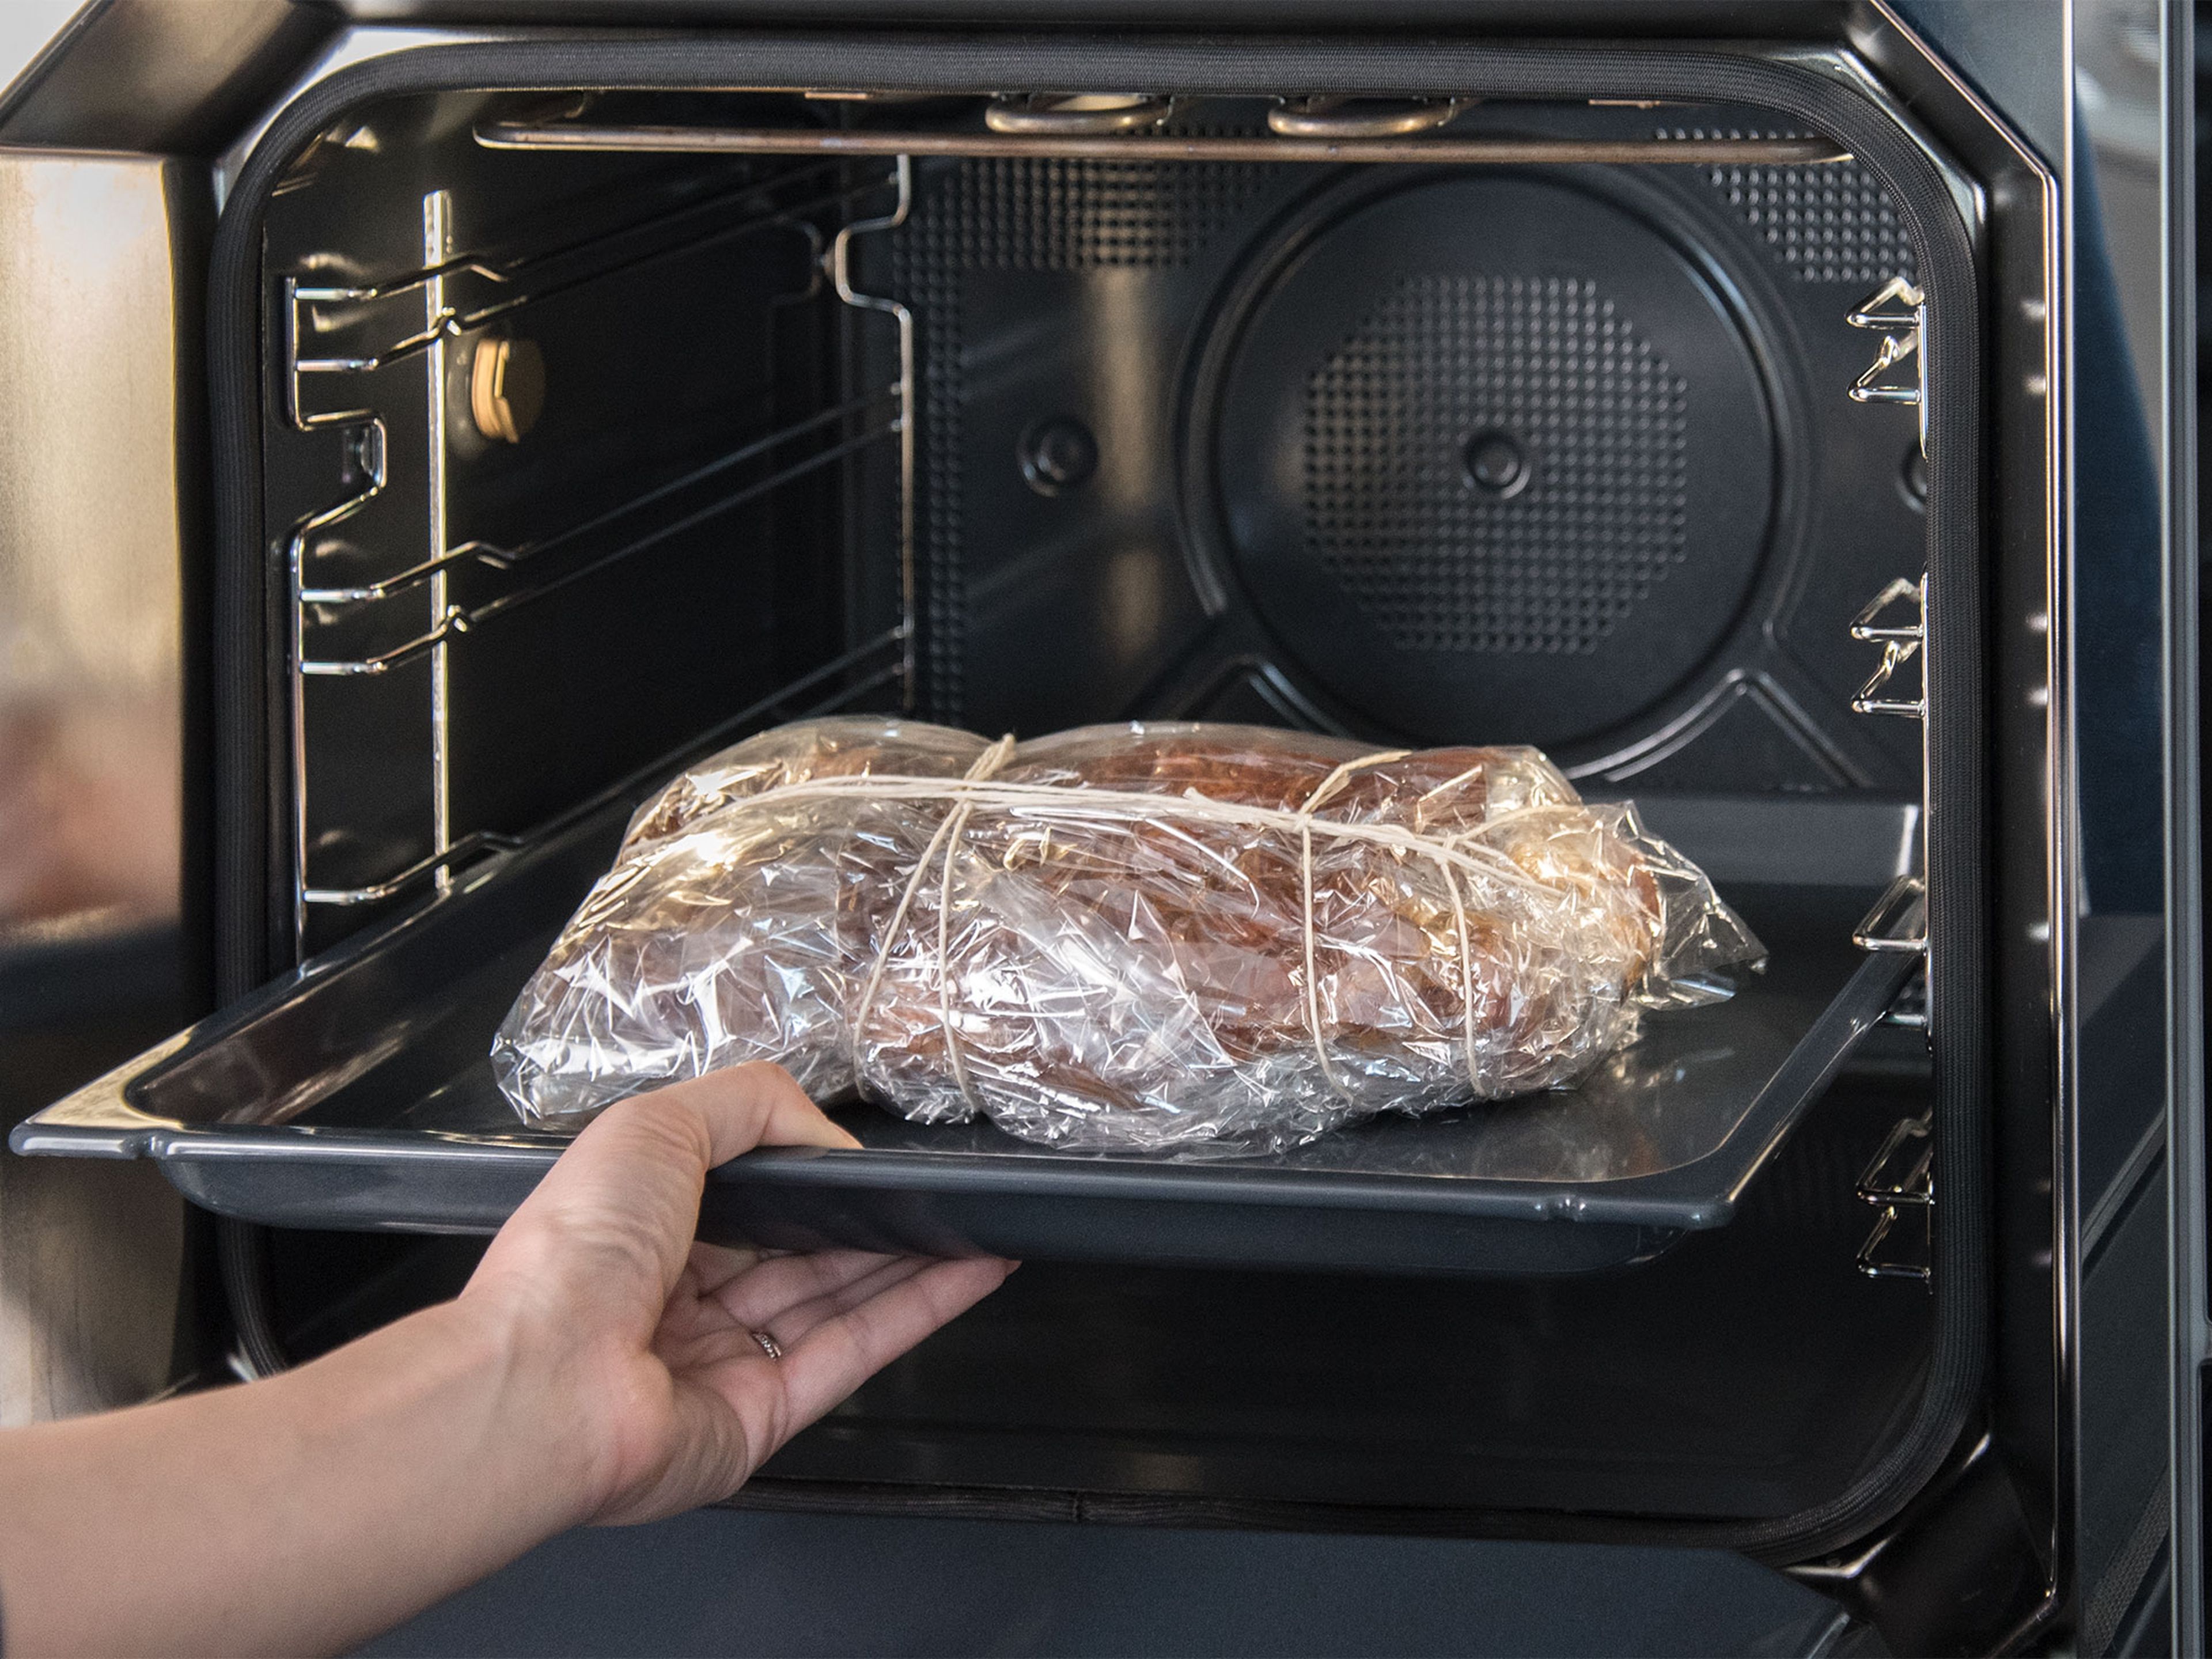 Transfer marinated pork to an oven bag, then wrap tightly in professional cooking foil. Tie with kitchen string to secure, then prick small holes into the foil. Place pork onto baking sheet, and transfer to oven on level 2. Set automatic program to "meat / pork / pulled pork" for 140 min.